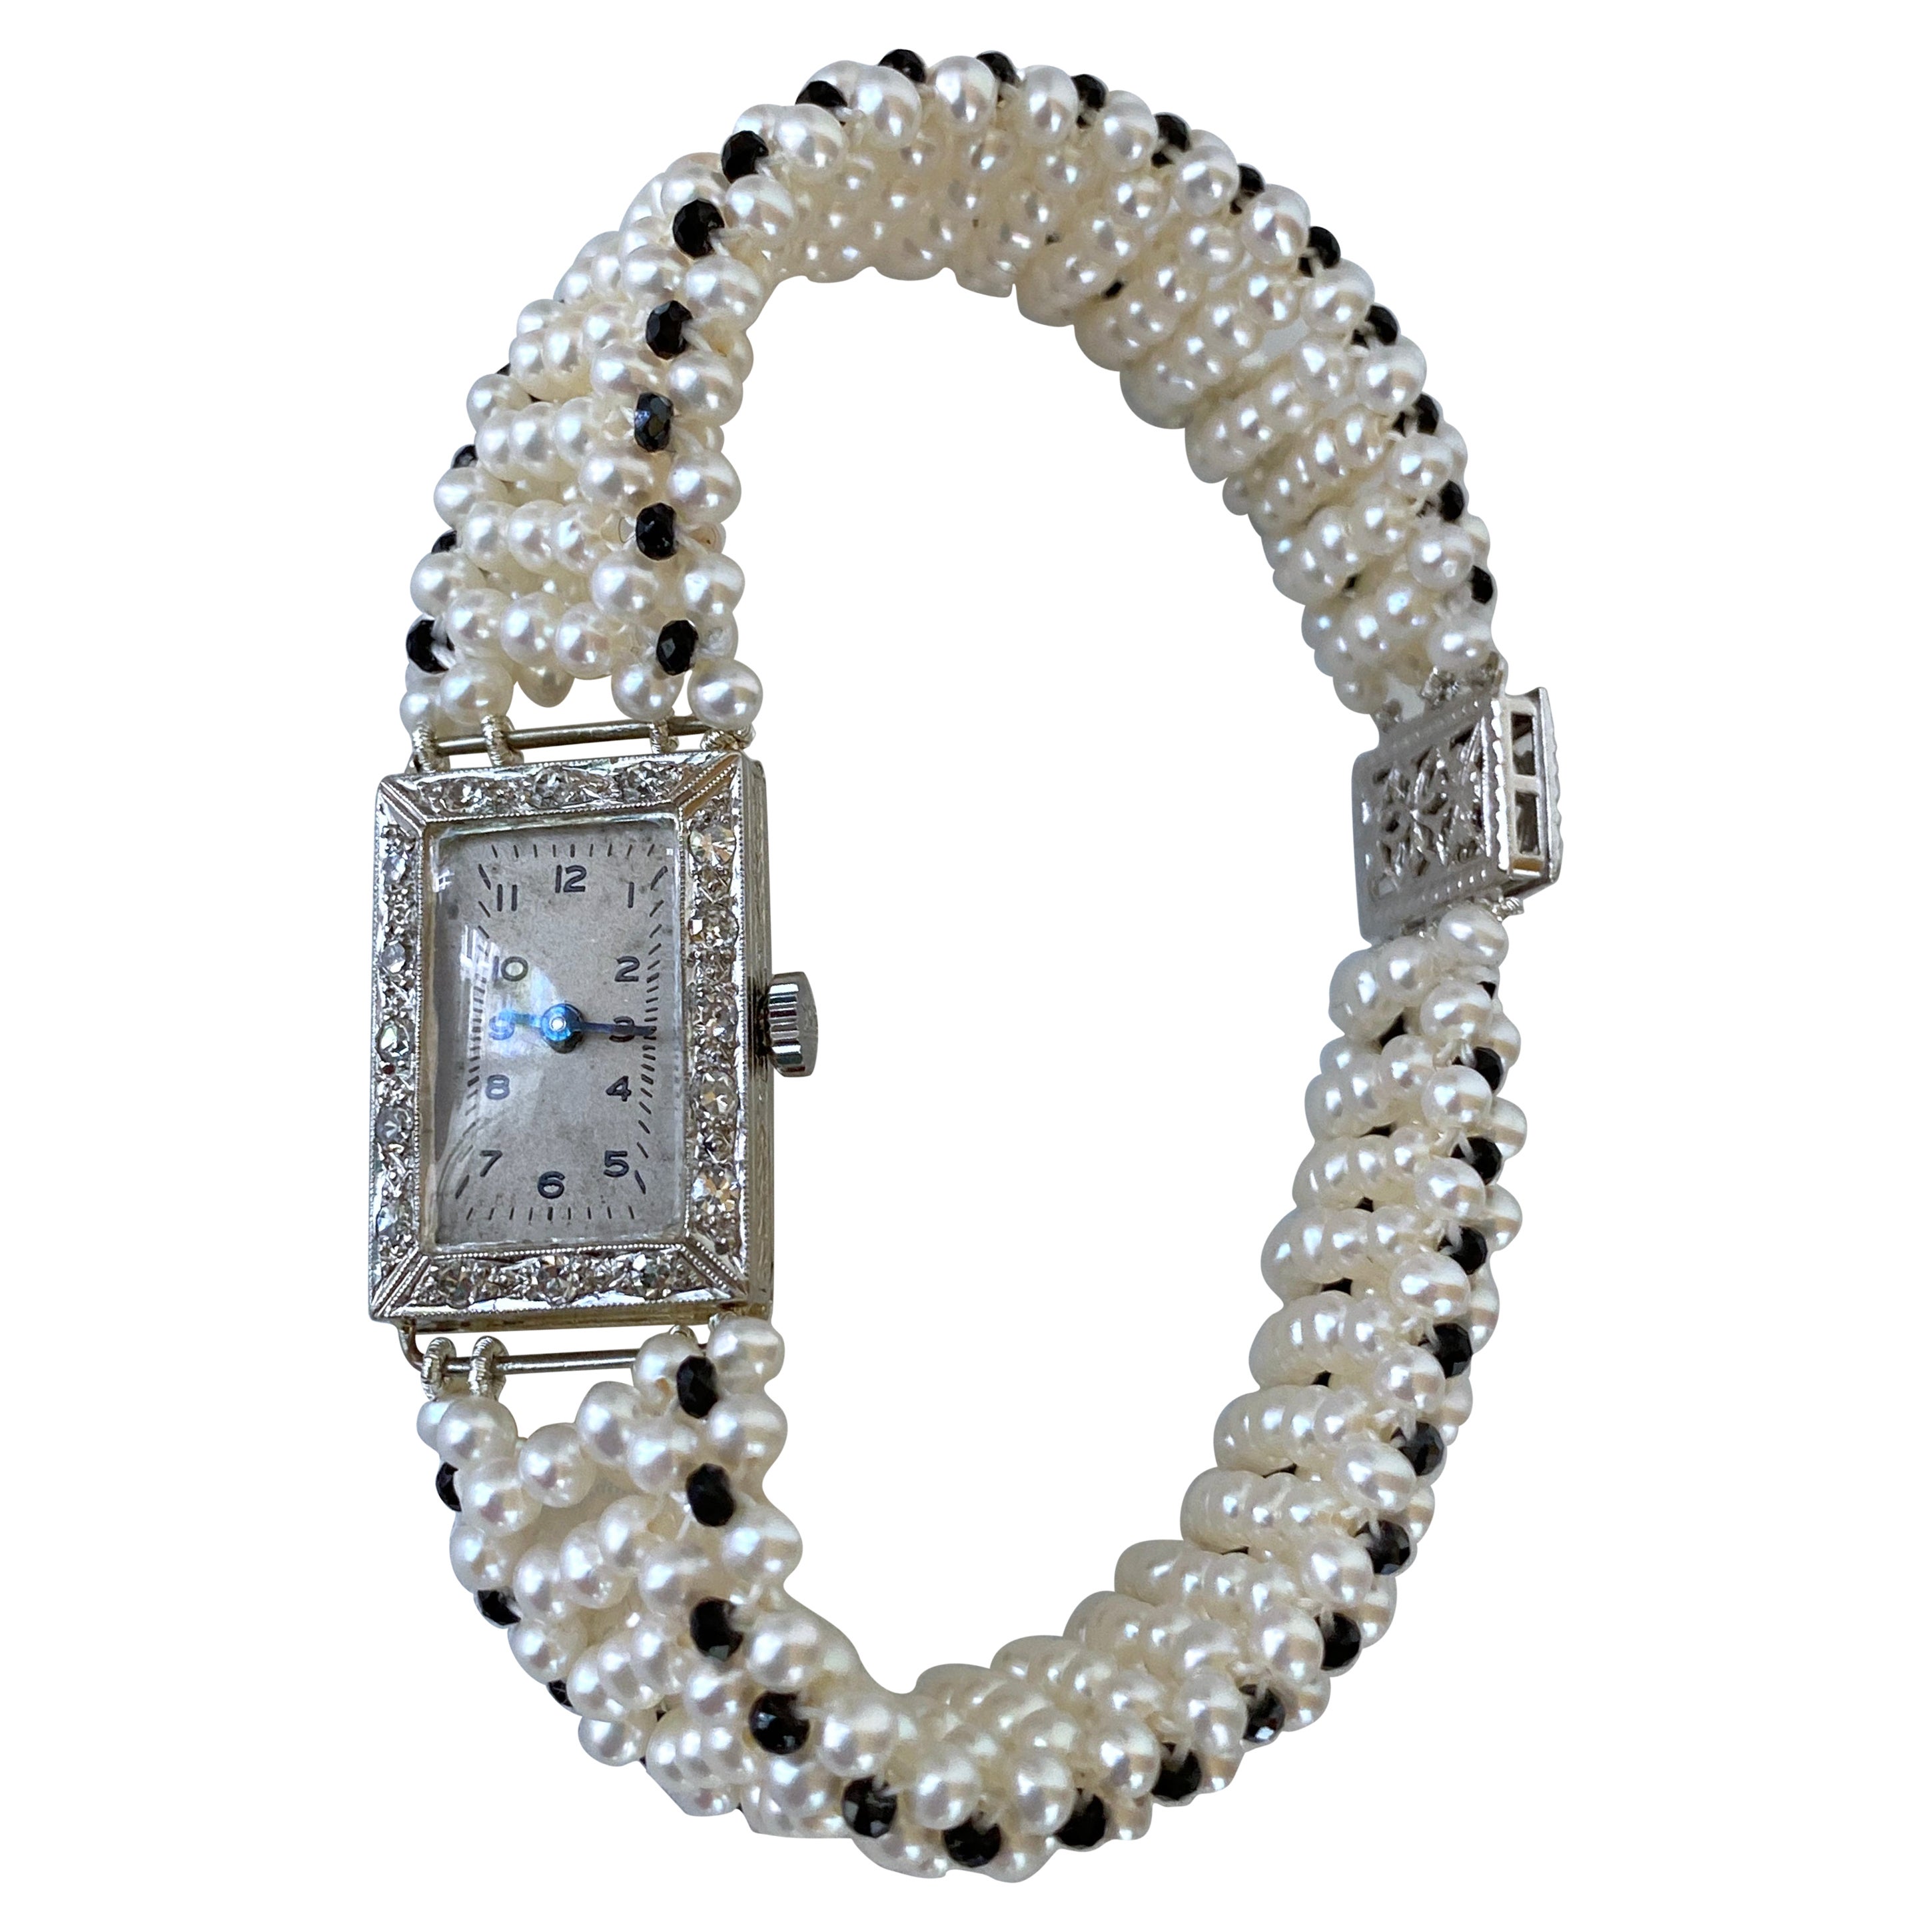 Marina J. 18k Vintage Diamond Encrusted Watch with Pearls & Black Spinel For Sale